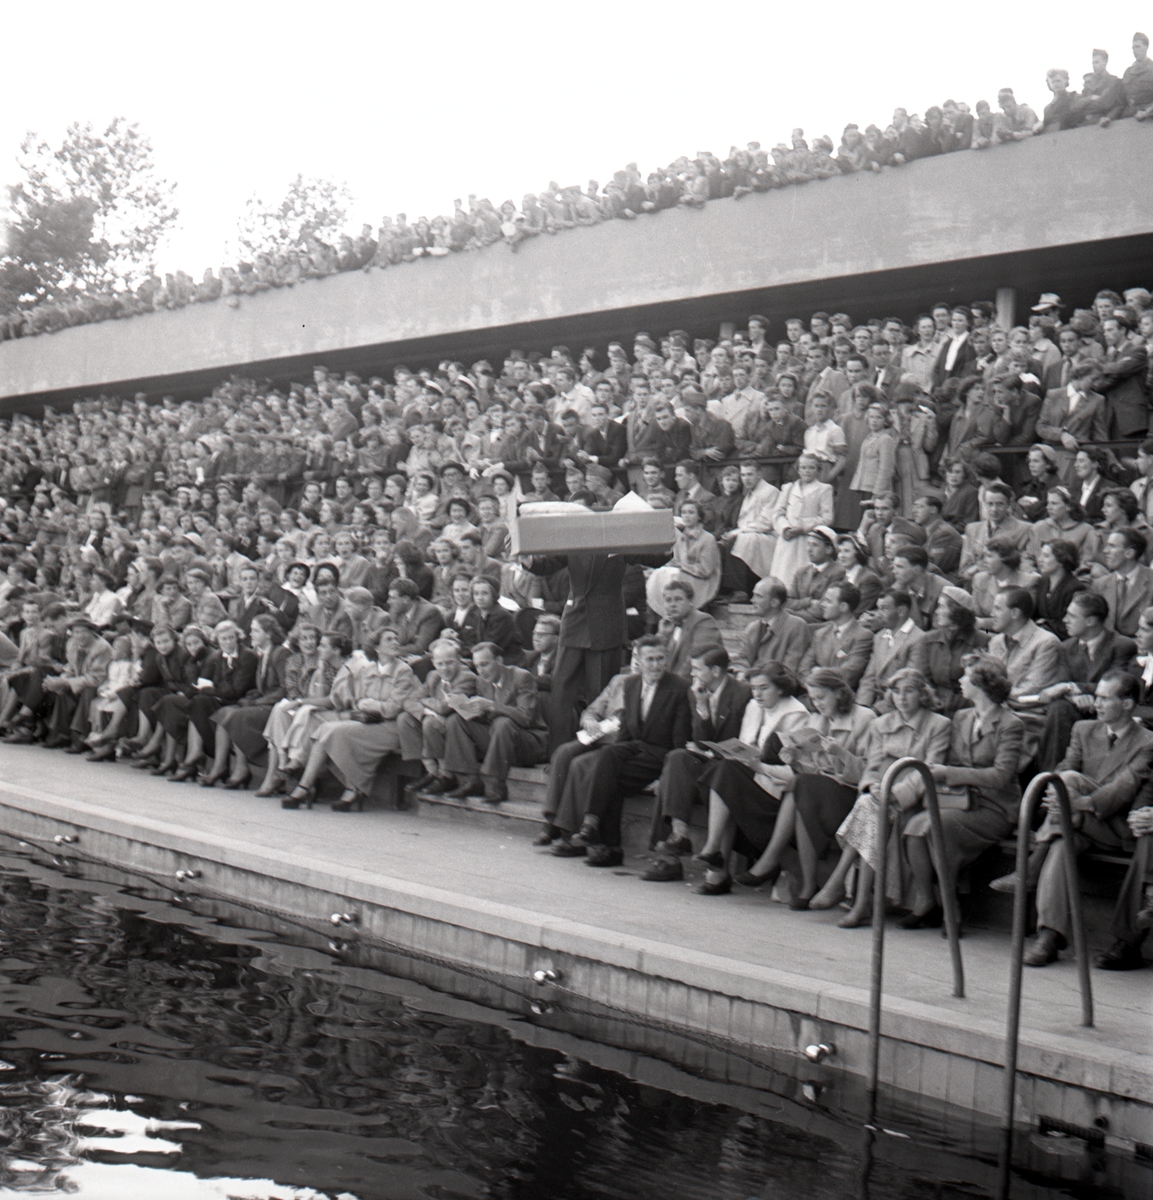 Swimming Contest at the Tinner Basin. The Tinner Basin was opened on 19 June 1938. The final design of the plant was created by the city architect Sten Westholm. The time-typical entrance, dressing and restaurant building is largely untouched since its construction. The driving political force behind the bath was the merchant Axel Brunsjö. In some circles, the Bath was called Brunsjö, after the merchant’s great commitment to the Bath and later became the foreman of the Bath.